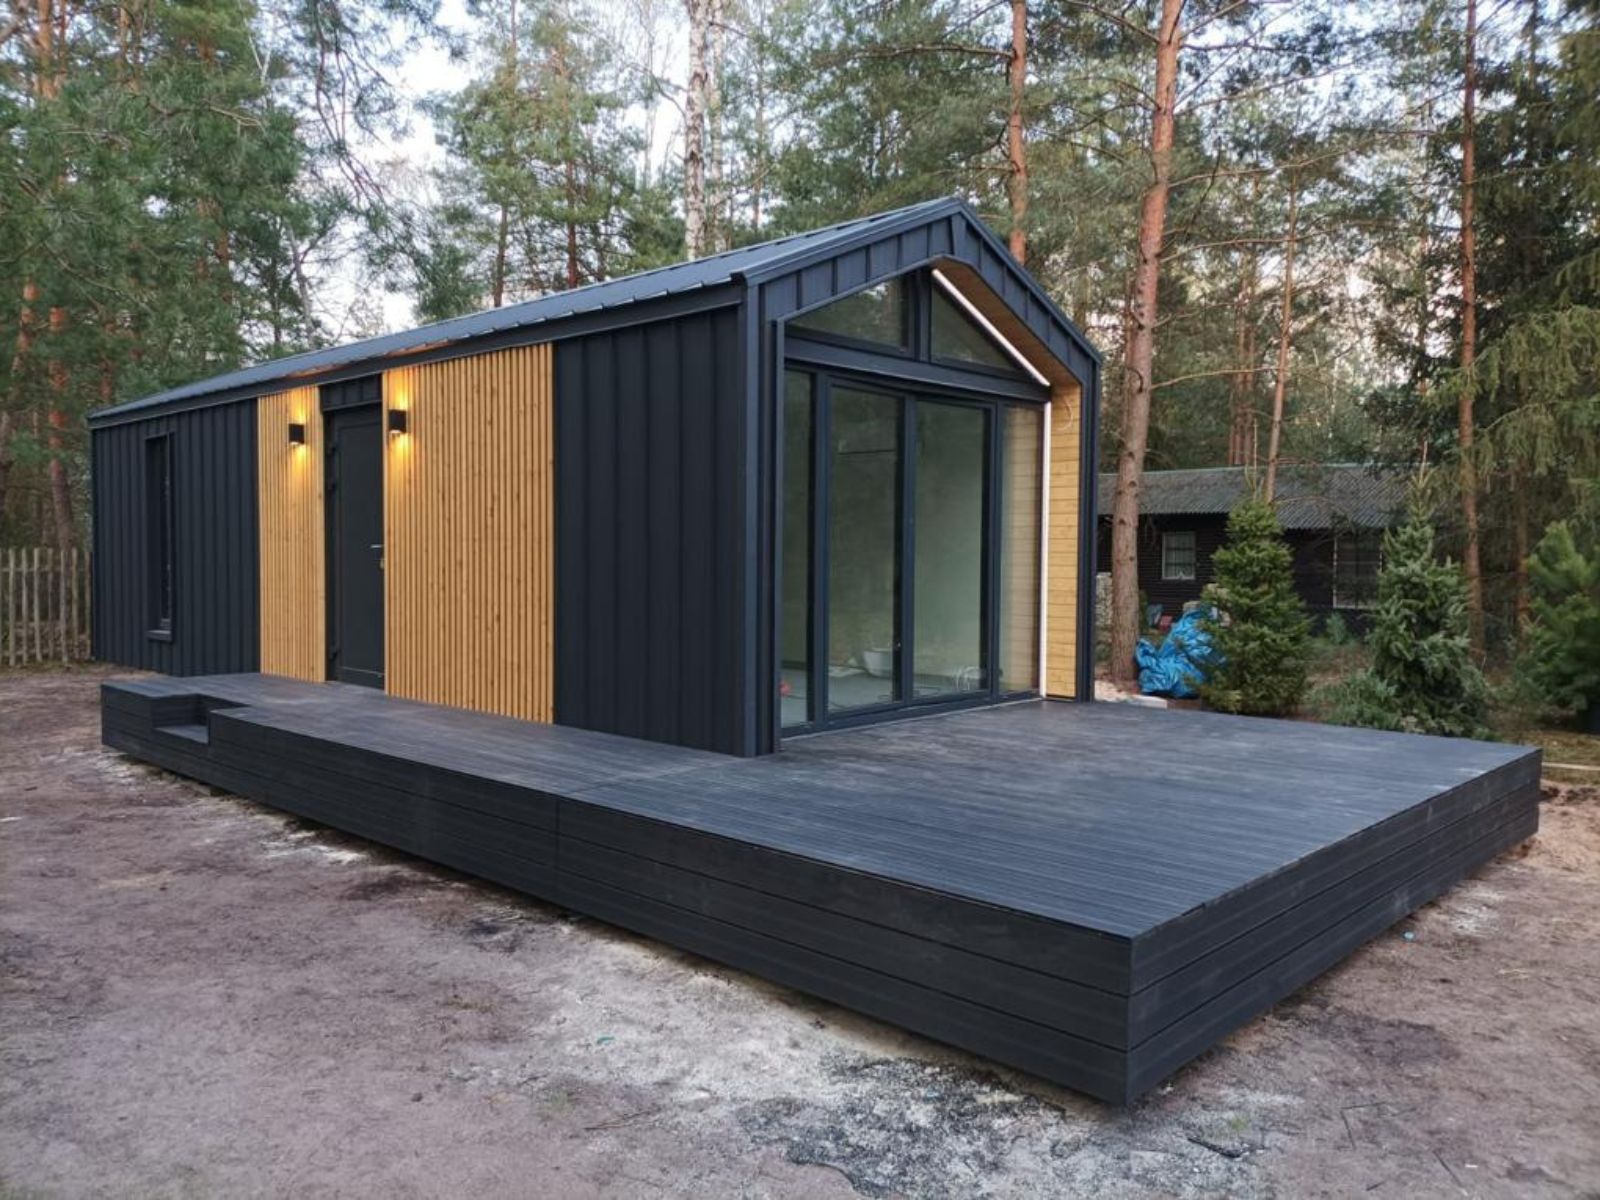 JPJ Mobile House – Producent domów mobilnych (61)